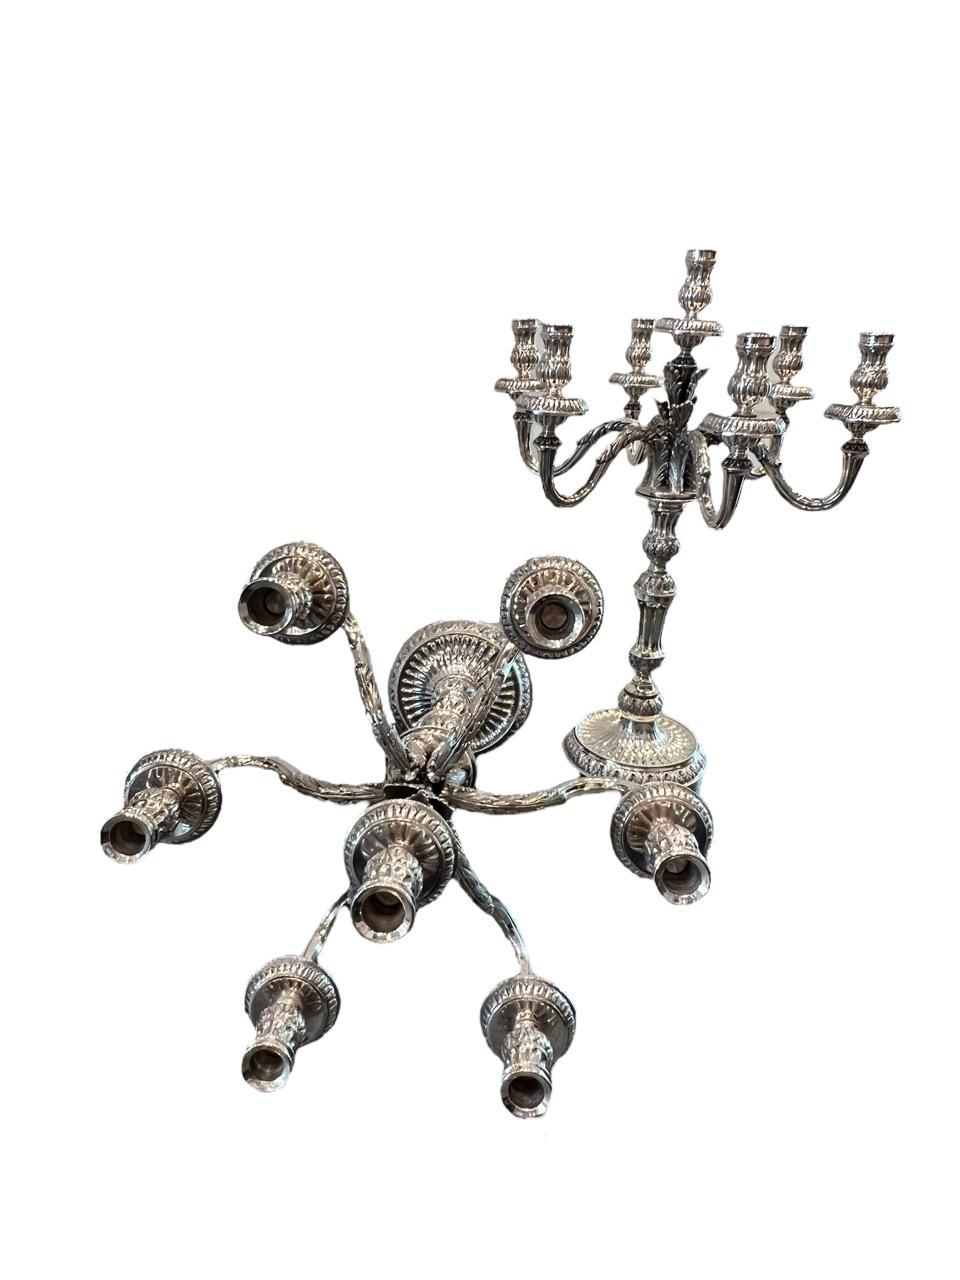 20th Century 1910 Italian Pair of Sterling Silver Candelabras, Tall and Heavy